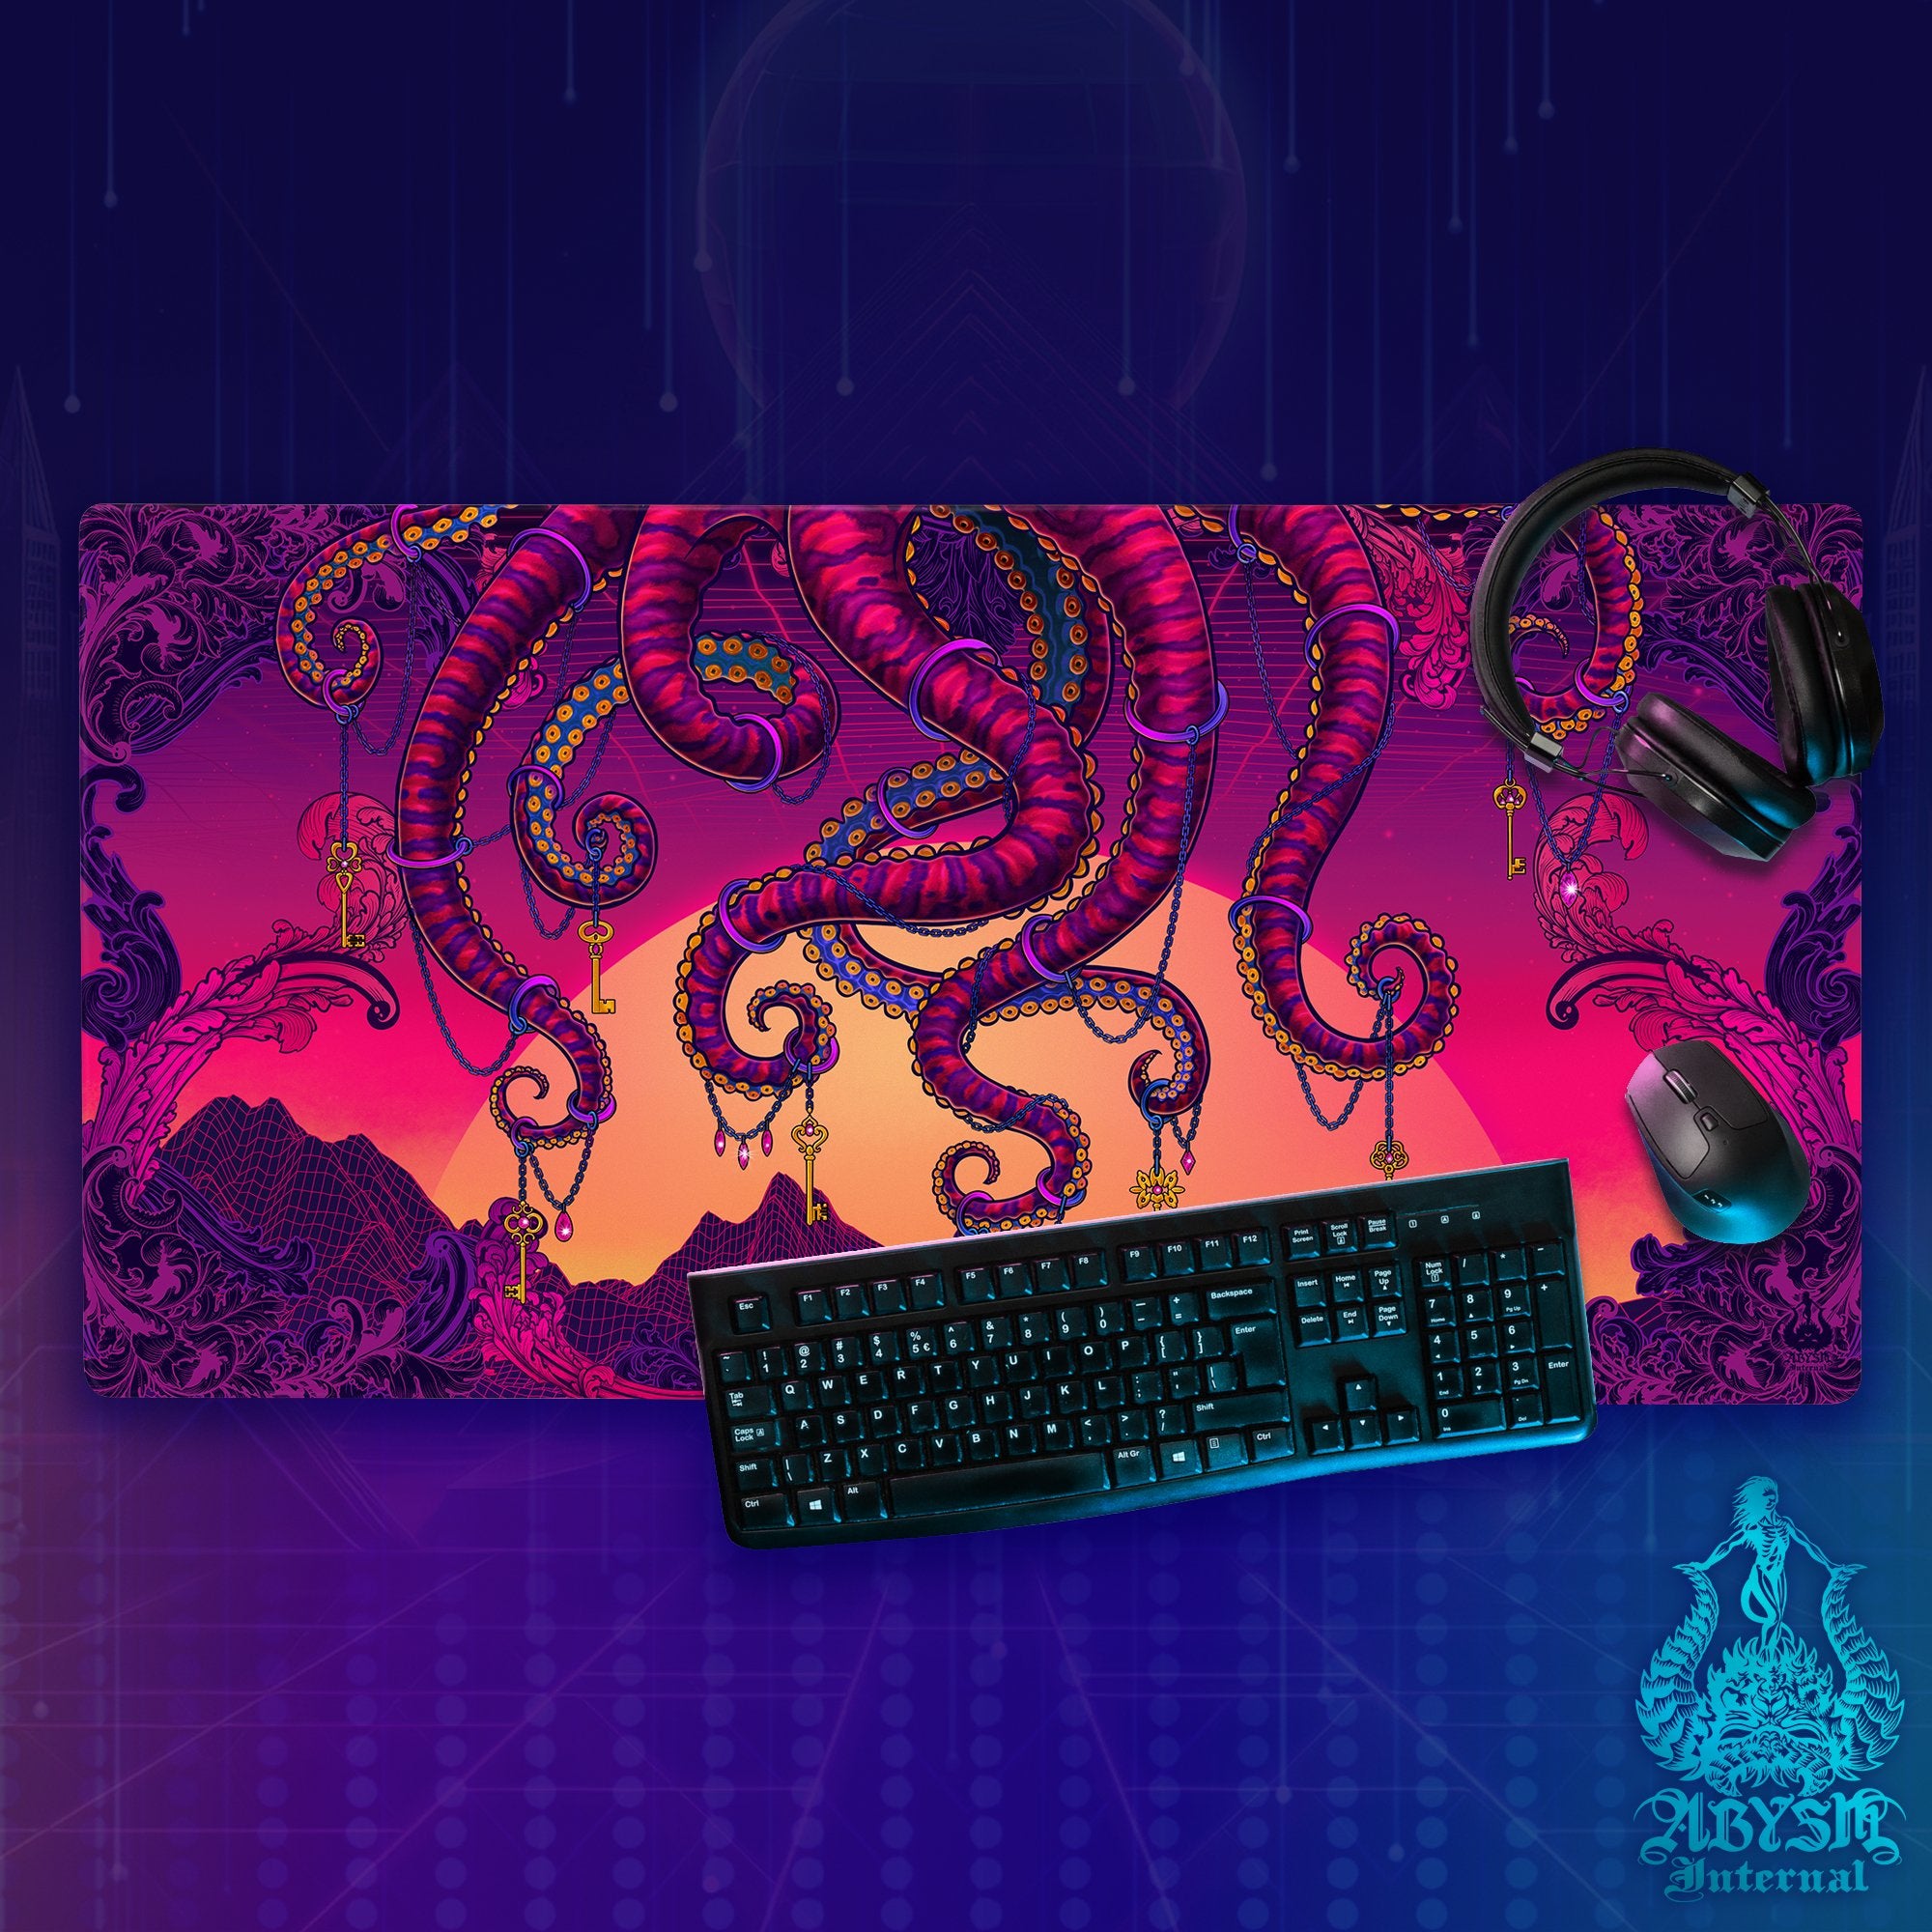 Psychedelic Workpad, Octopus Desk Mat, Tentacles Gaming Mouse Pad, Gamer Table Protector Cover, Fantasy Art Print - Vaporwave - Abysm Internal